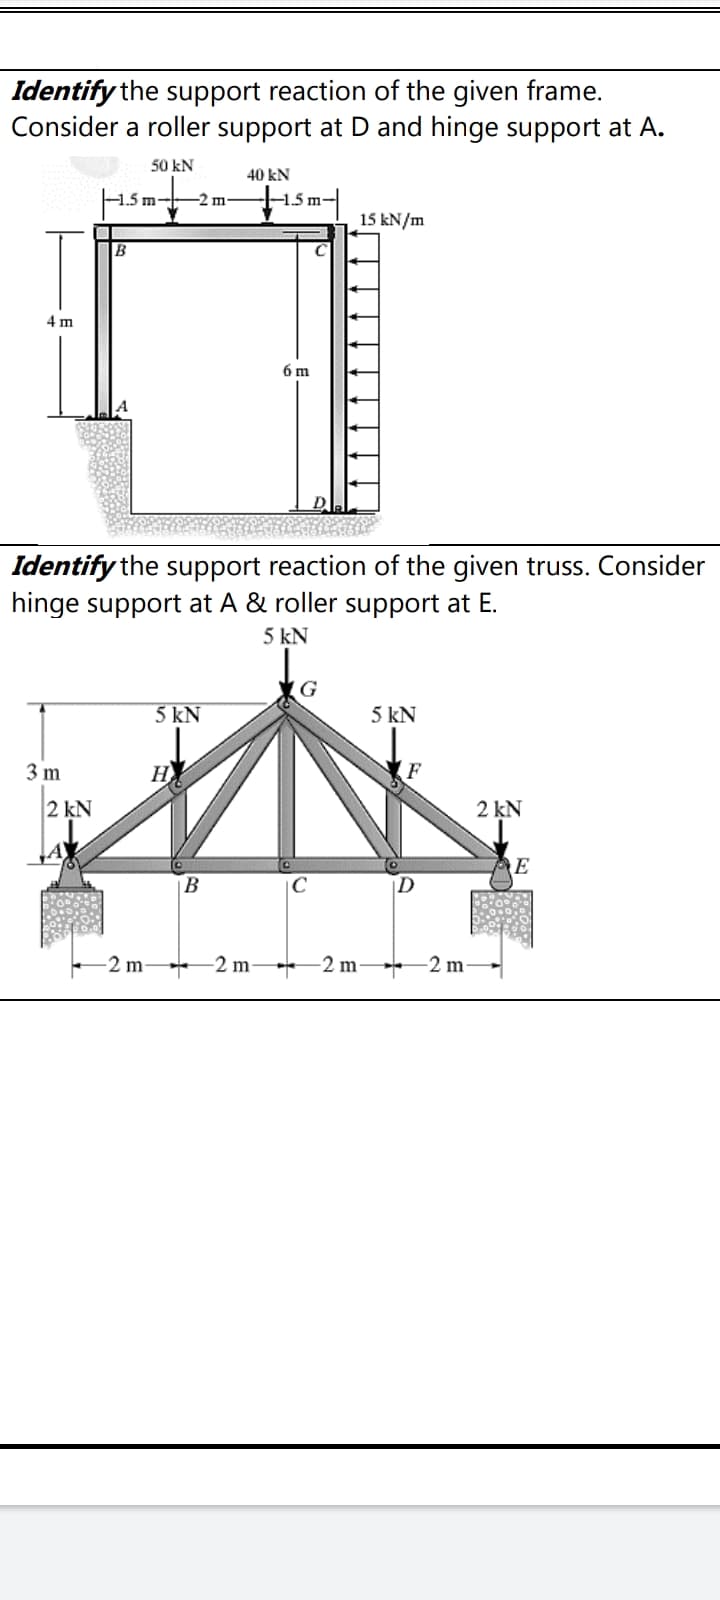 Identify the support reaction of the given frame.
Consider a roller support at D and hinge support at A.
50 kN
40 kN
ism-|
1.5 m
2 m-
15 kN/m
B
4 m
6 m
Identify the support reaction of the given truss. Consider
hinge support at A & roller support at E.
5 kN
G
5 kN
5 kN
3 m
H
2 kN
2 kN
E
B
D
-2 m
-2 m-
-2 m-
-2 m-
